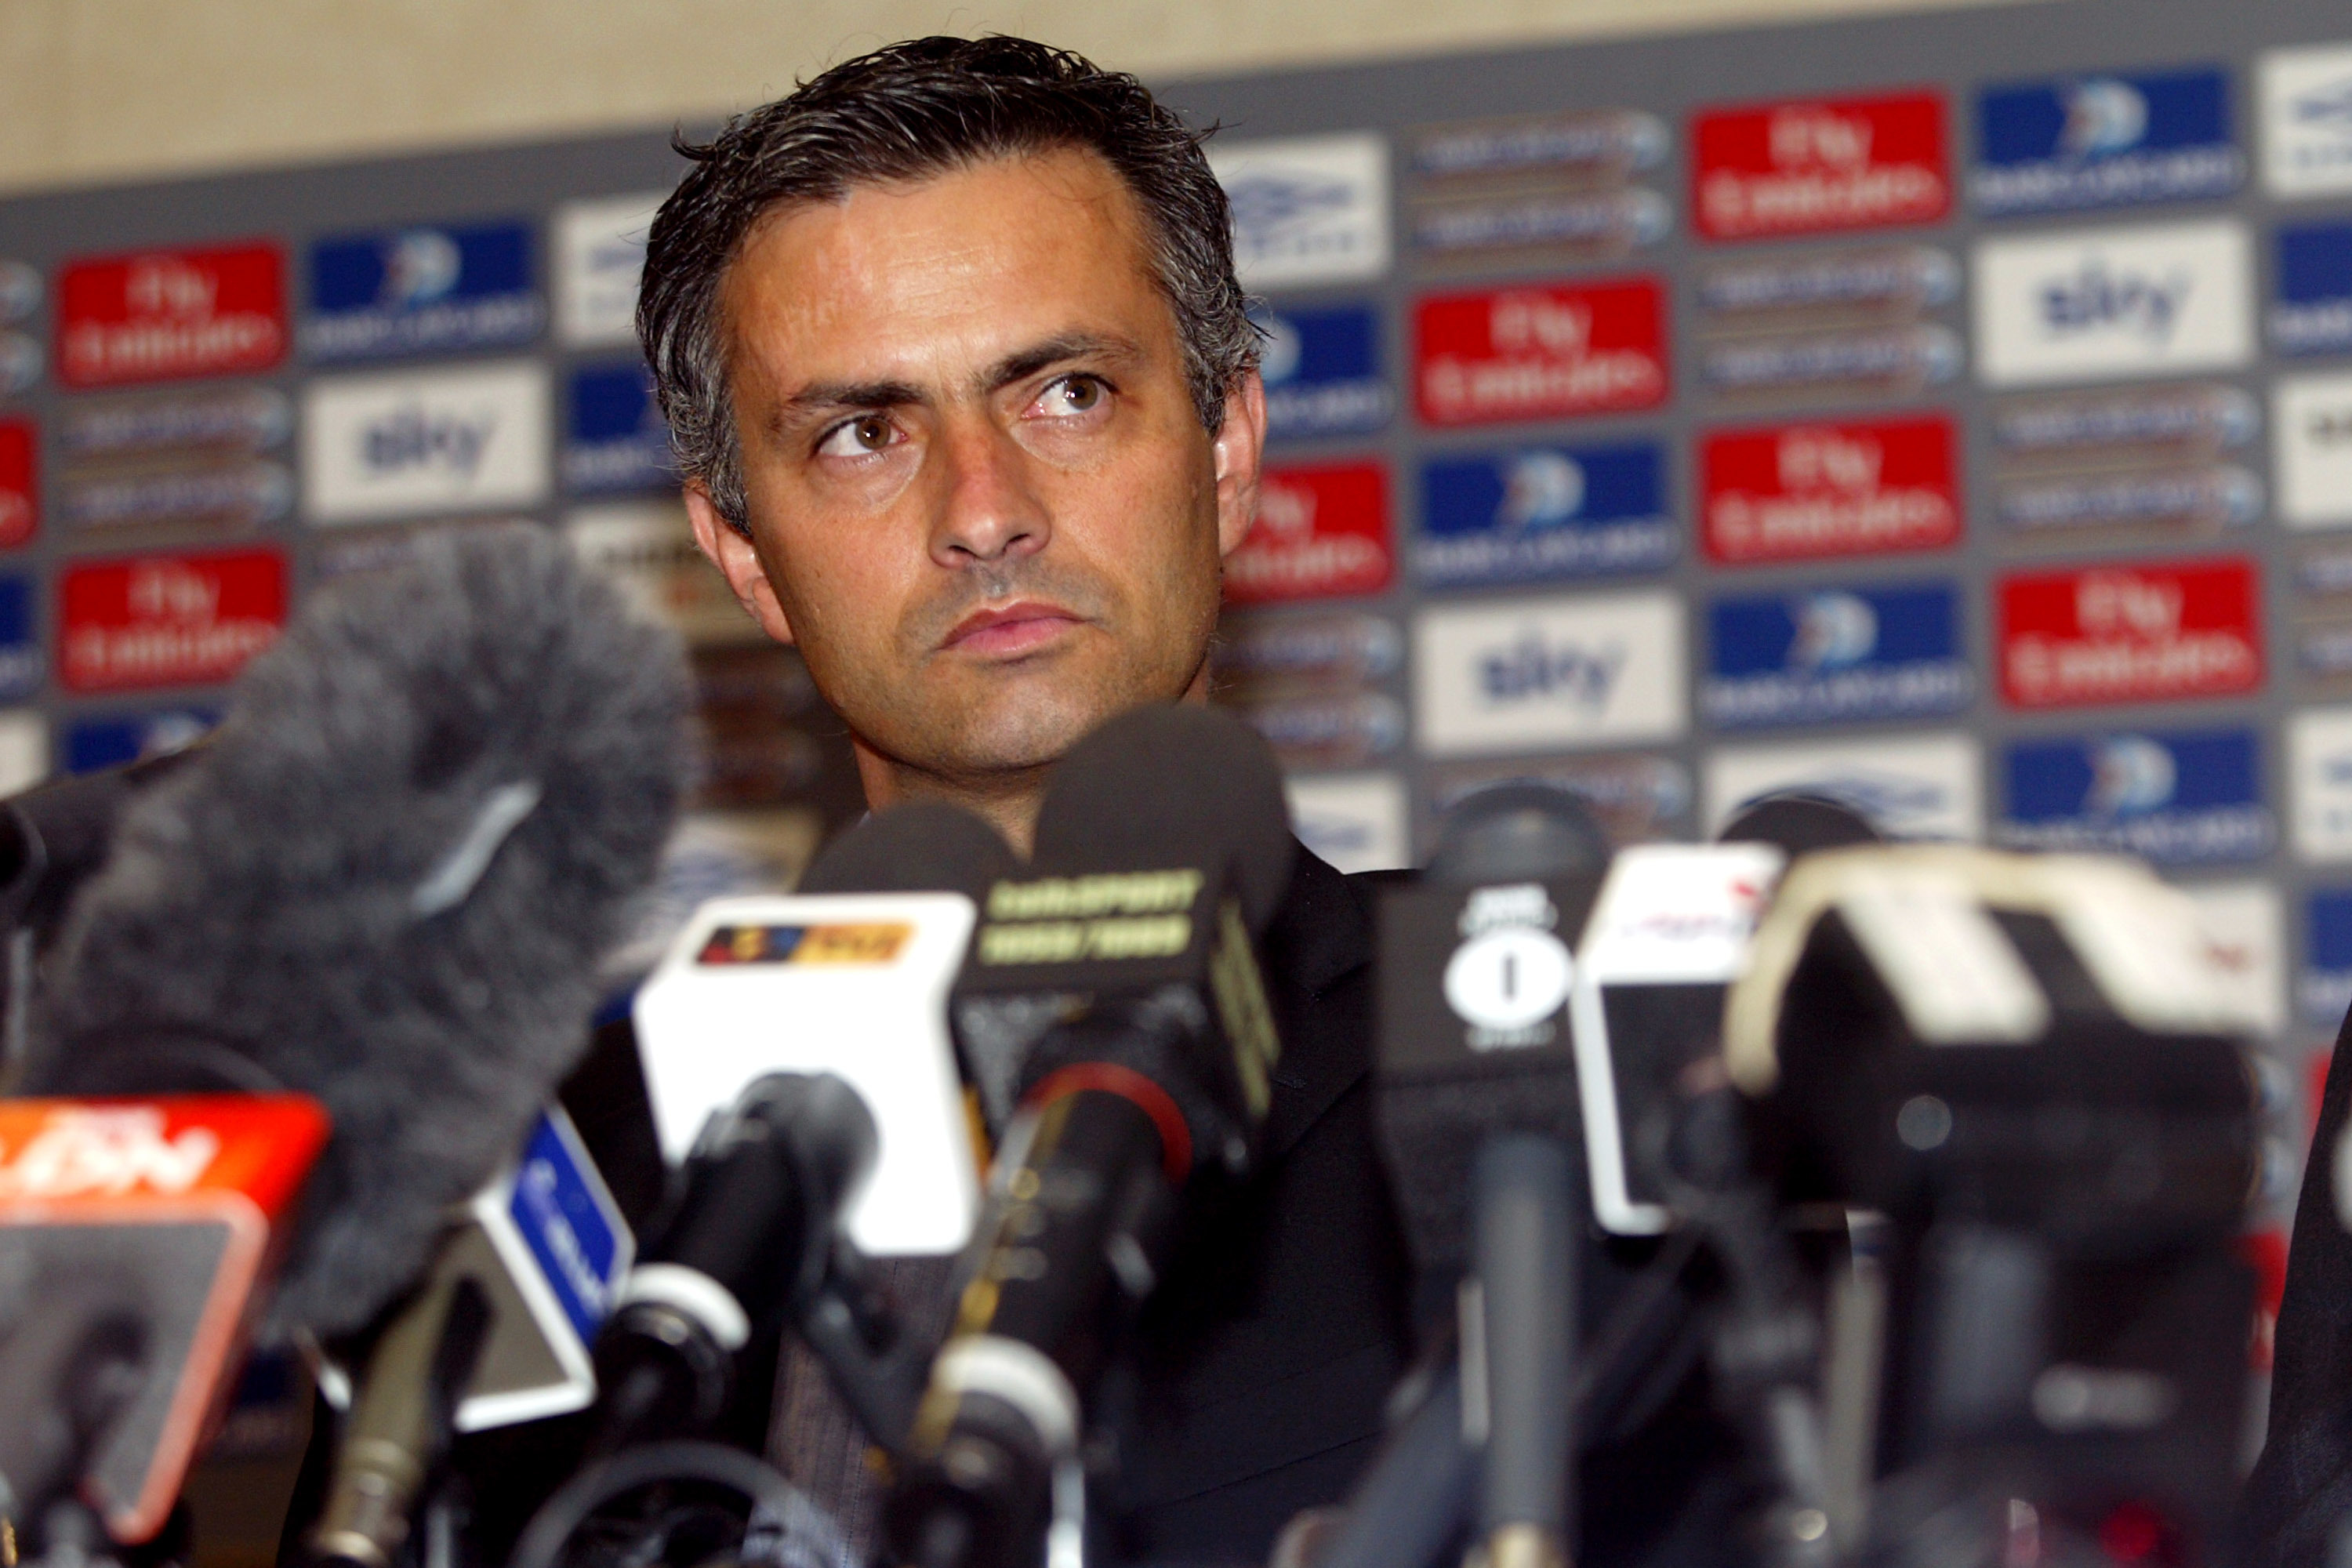 Mourinho declared himself as the 'Special One' in his first press conference. Image: PA Images